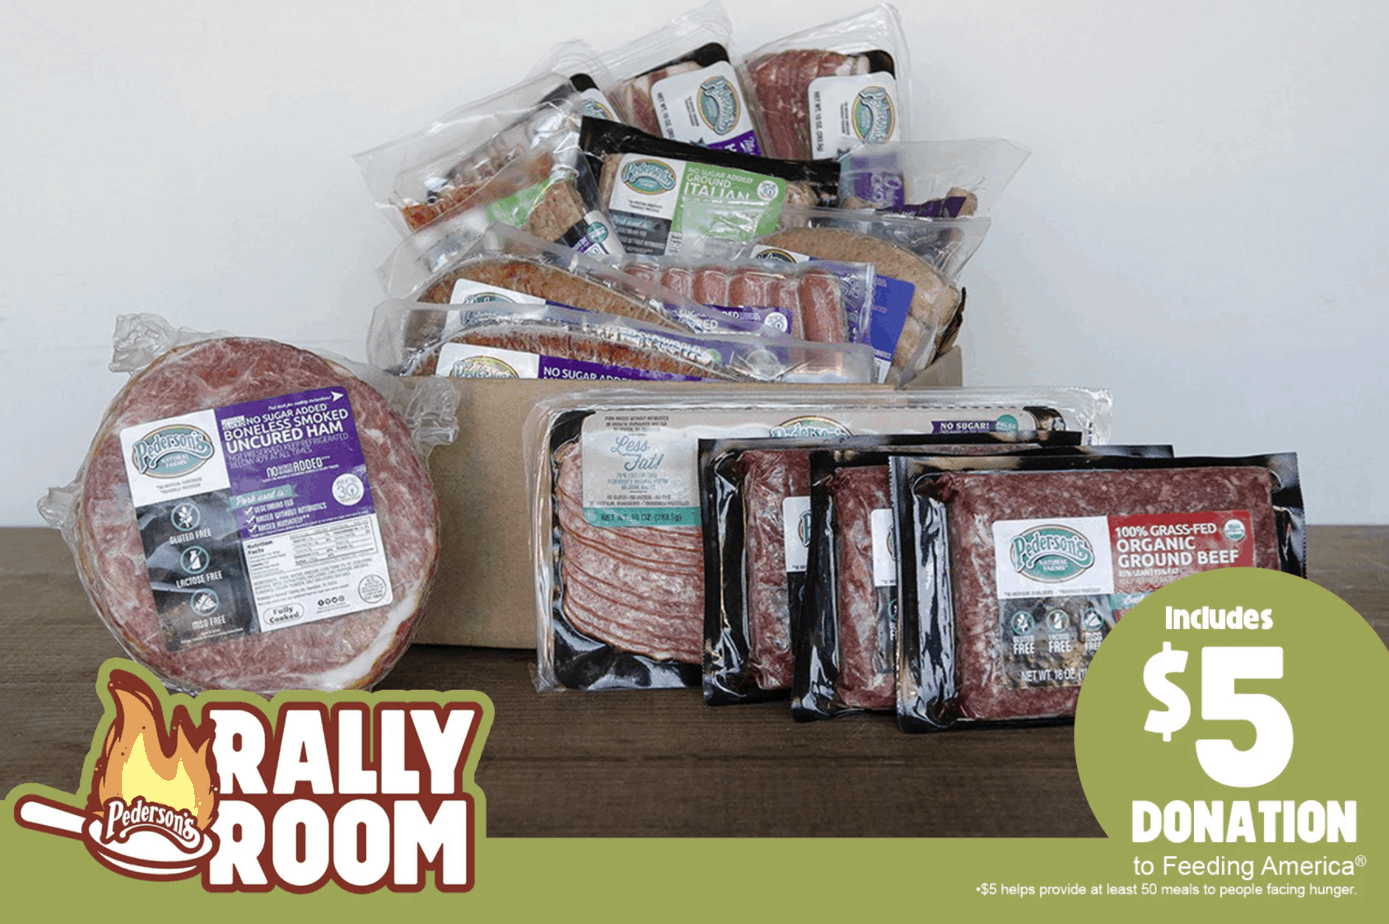 display of the sugar free meal prep bundle from Pederson's. three packages of round beef, one boneless smoked uncured ham, bacon, sausages, and more. includes a $5 donation to feeding america.